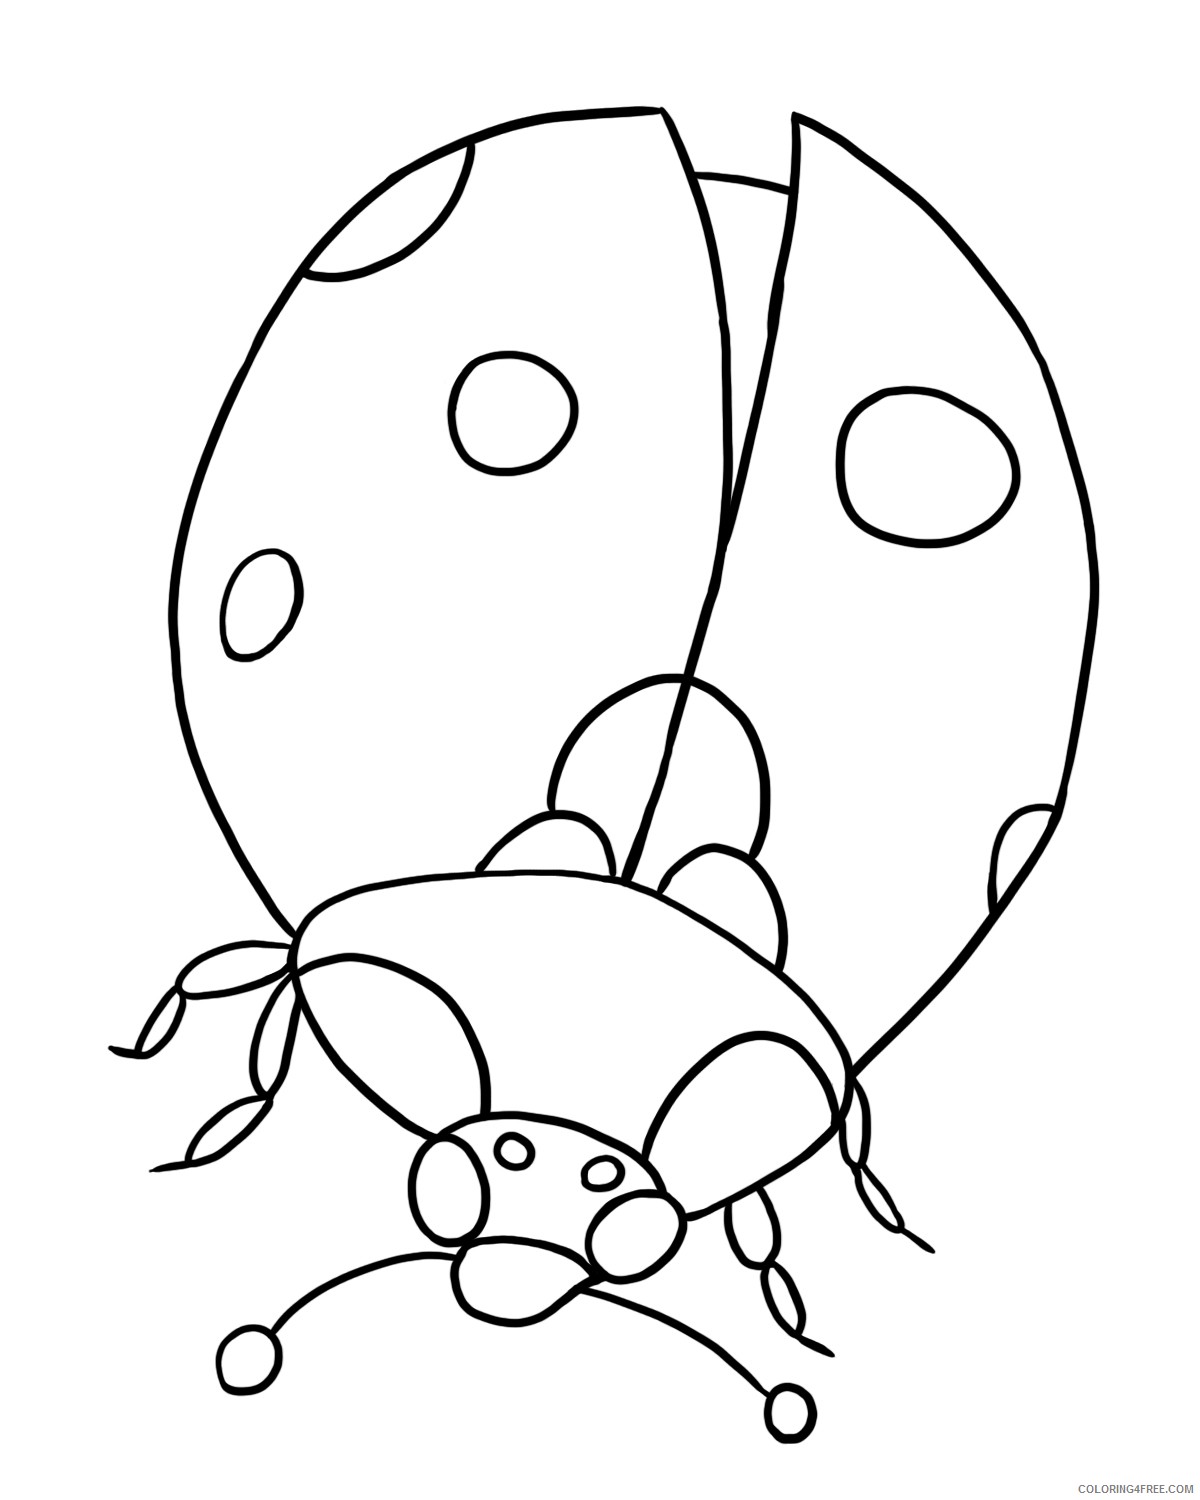 ladybug coloring pages to print Coloring4free